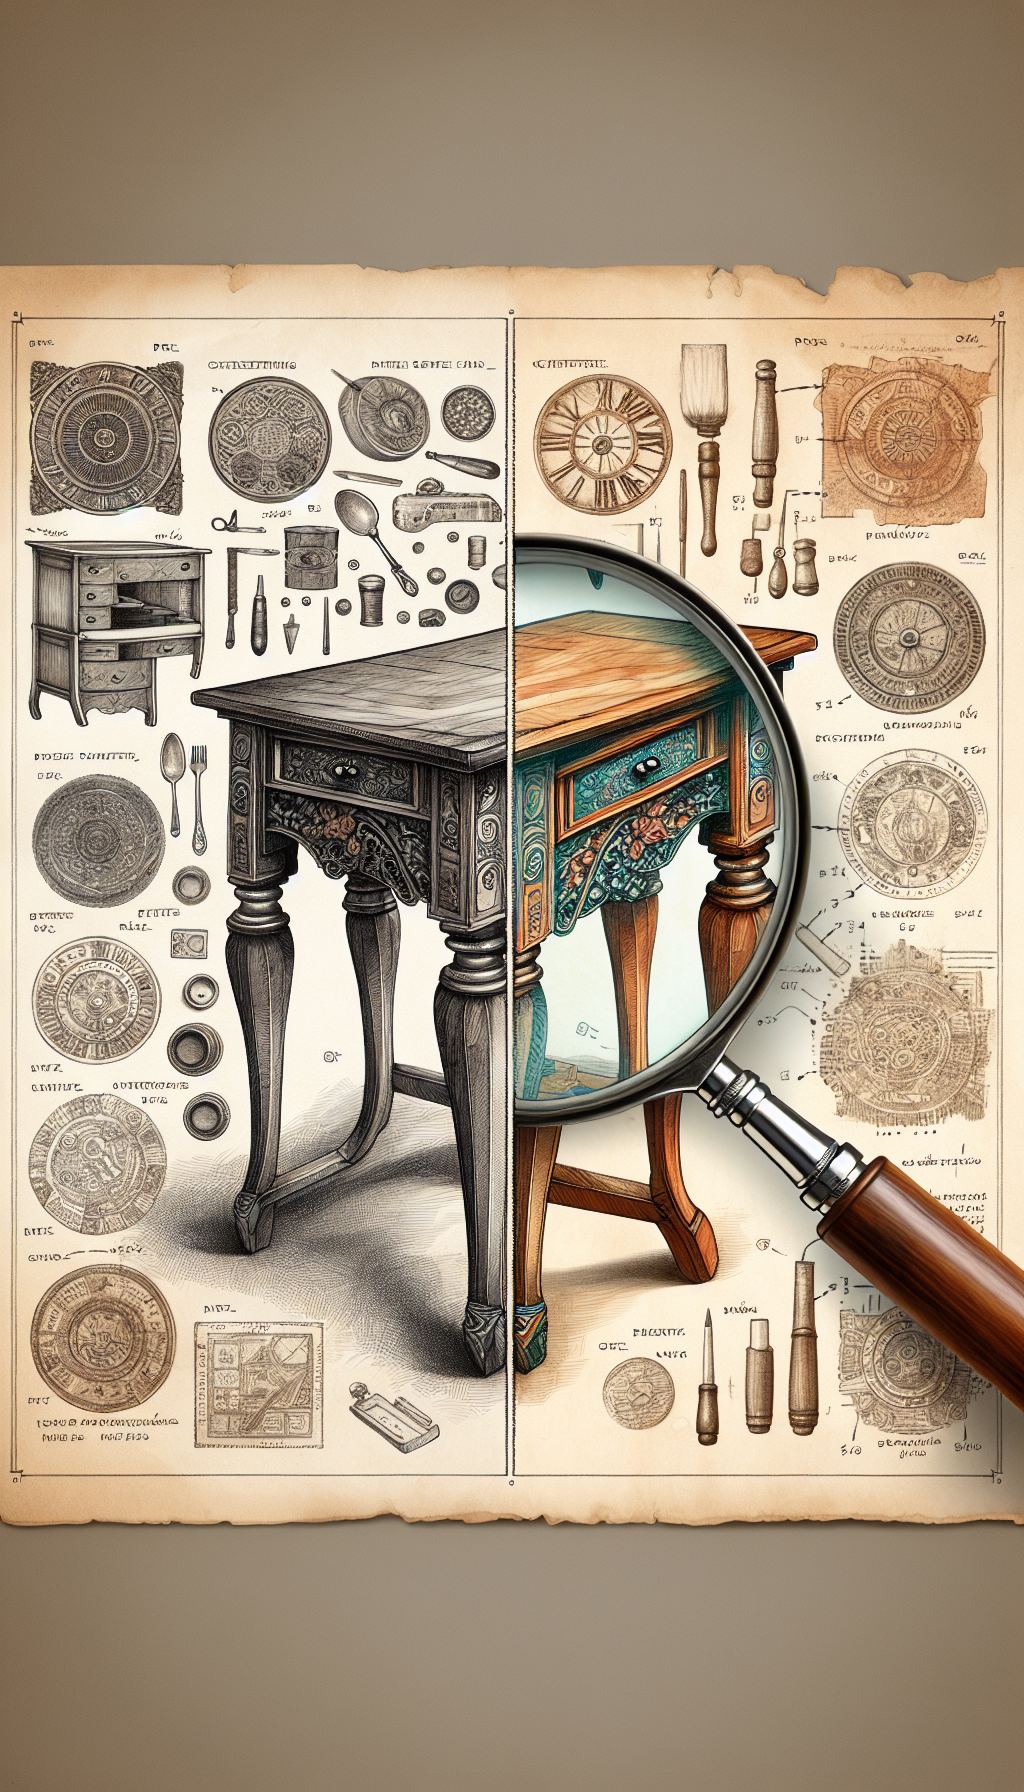 An intricate illustration featuring an antique table, half polished and pristine, the other half showing age with a magnifying glass hovering over a leg to reveal maker's marks and patina layers. Diverse sketch lines transition to a watercolor style, symbolizing the contrast between the table's history and its enduring craftsmanship, guiding the viewer in identifying the tales of time etched in wood.